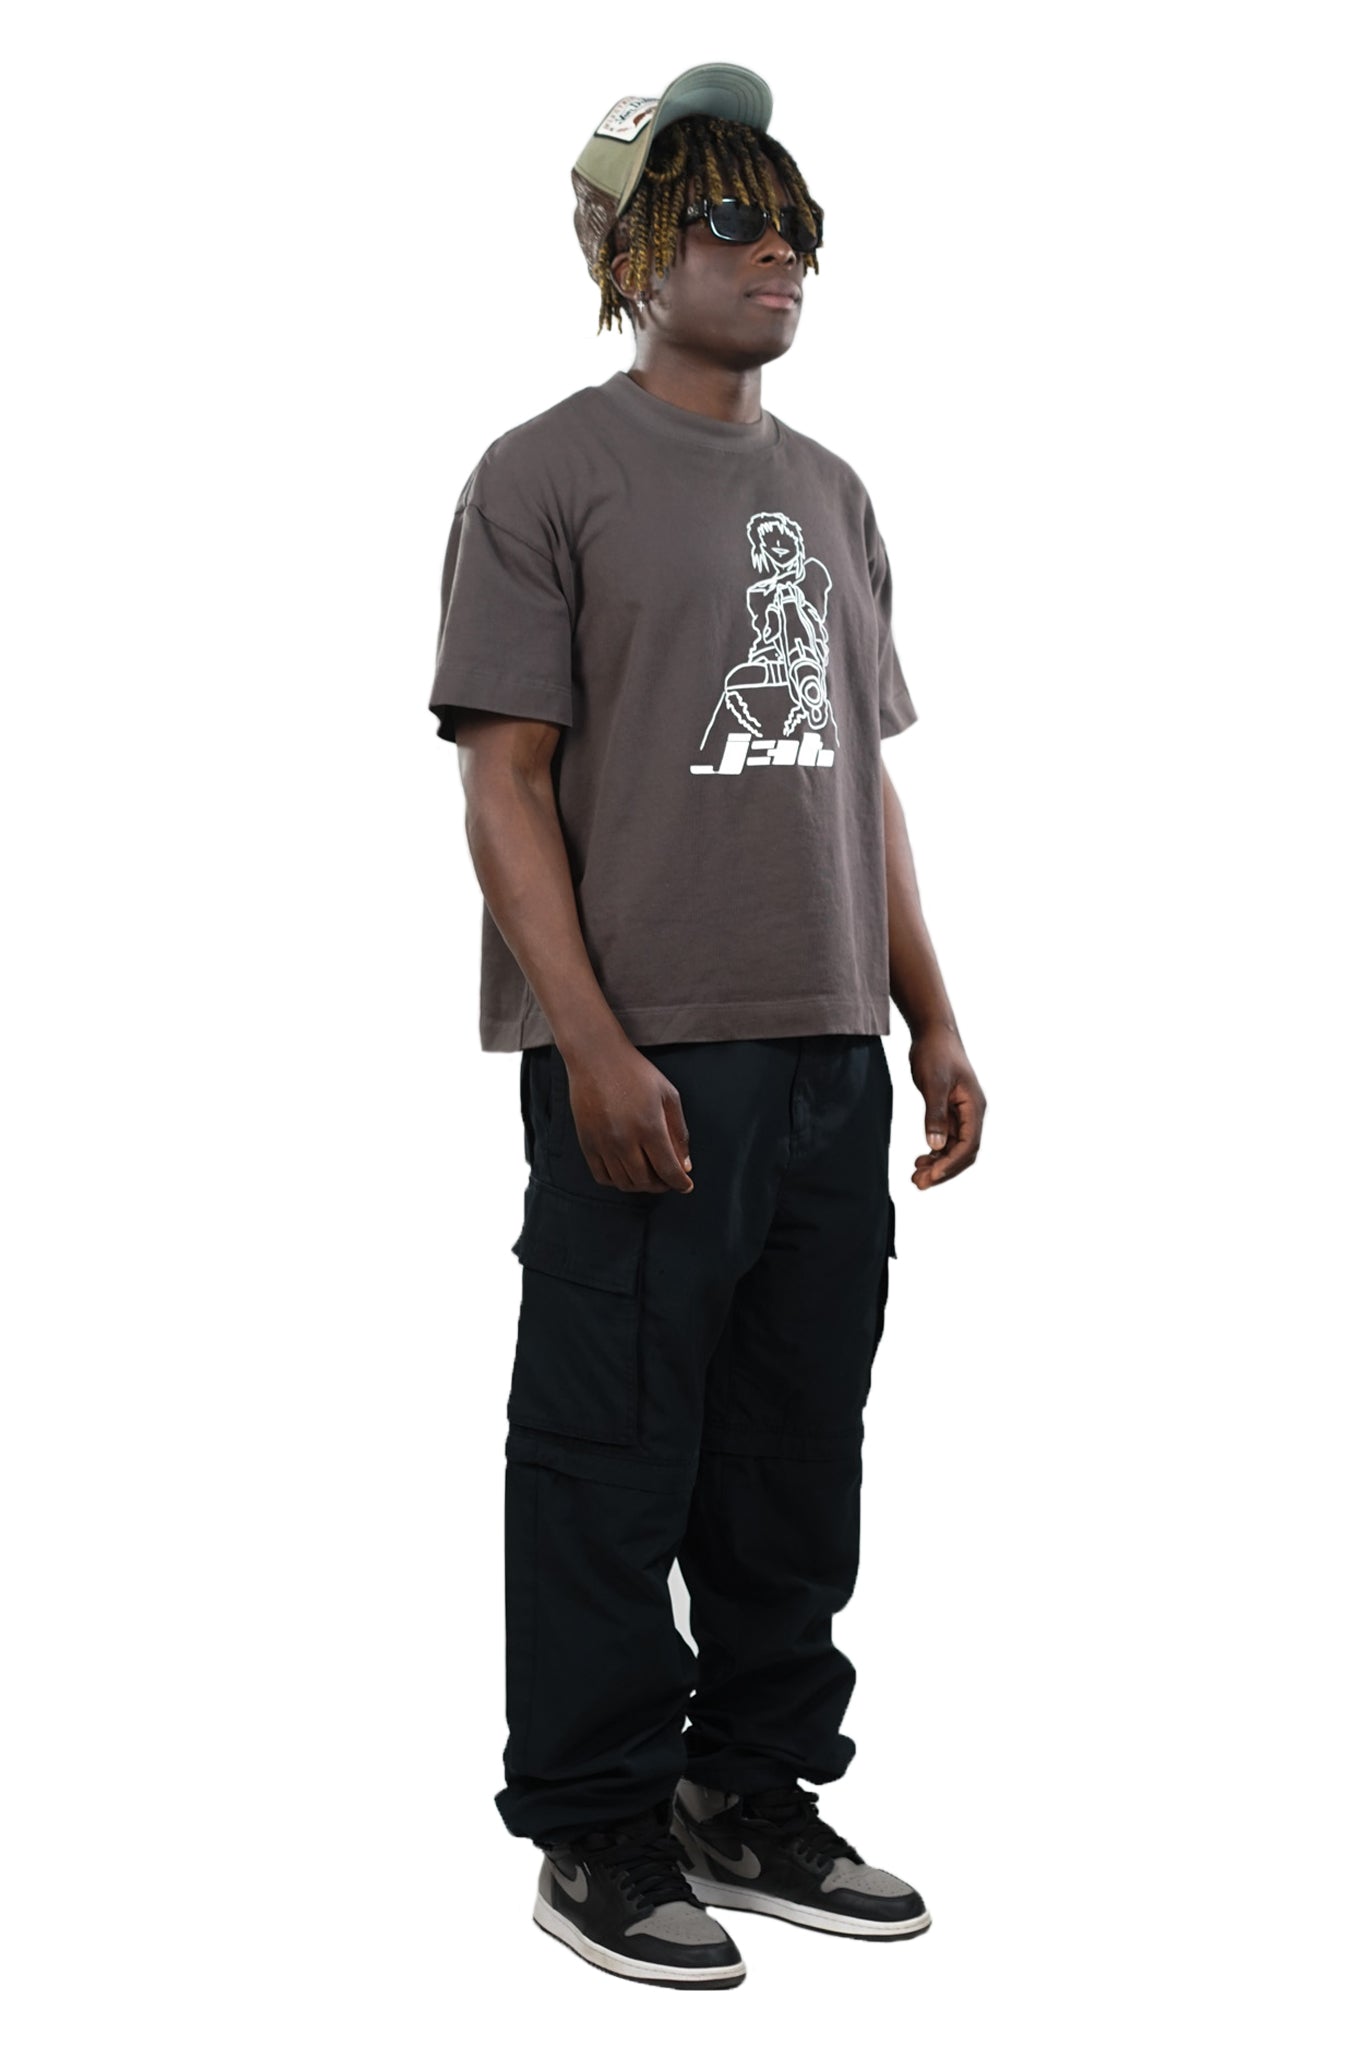 5'9" male wearing Remy Tee grey is a size medium - 45 degree angle